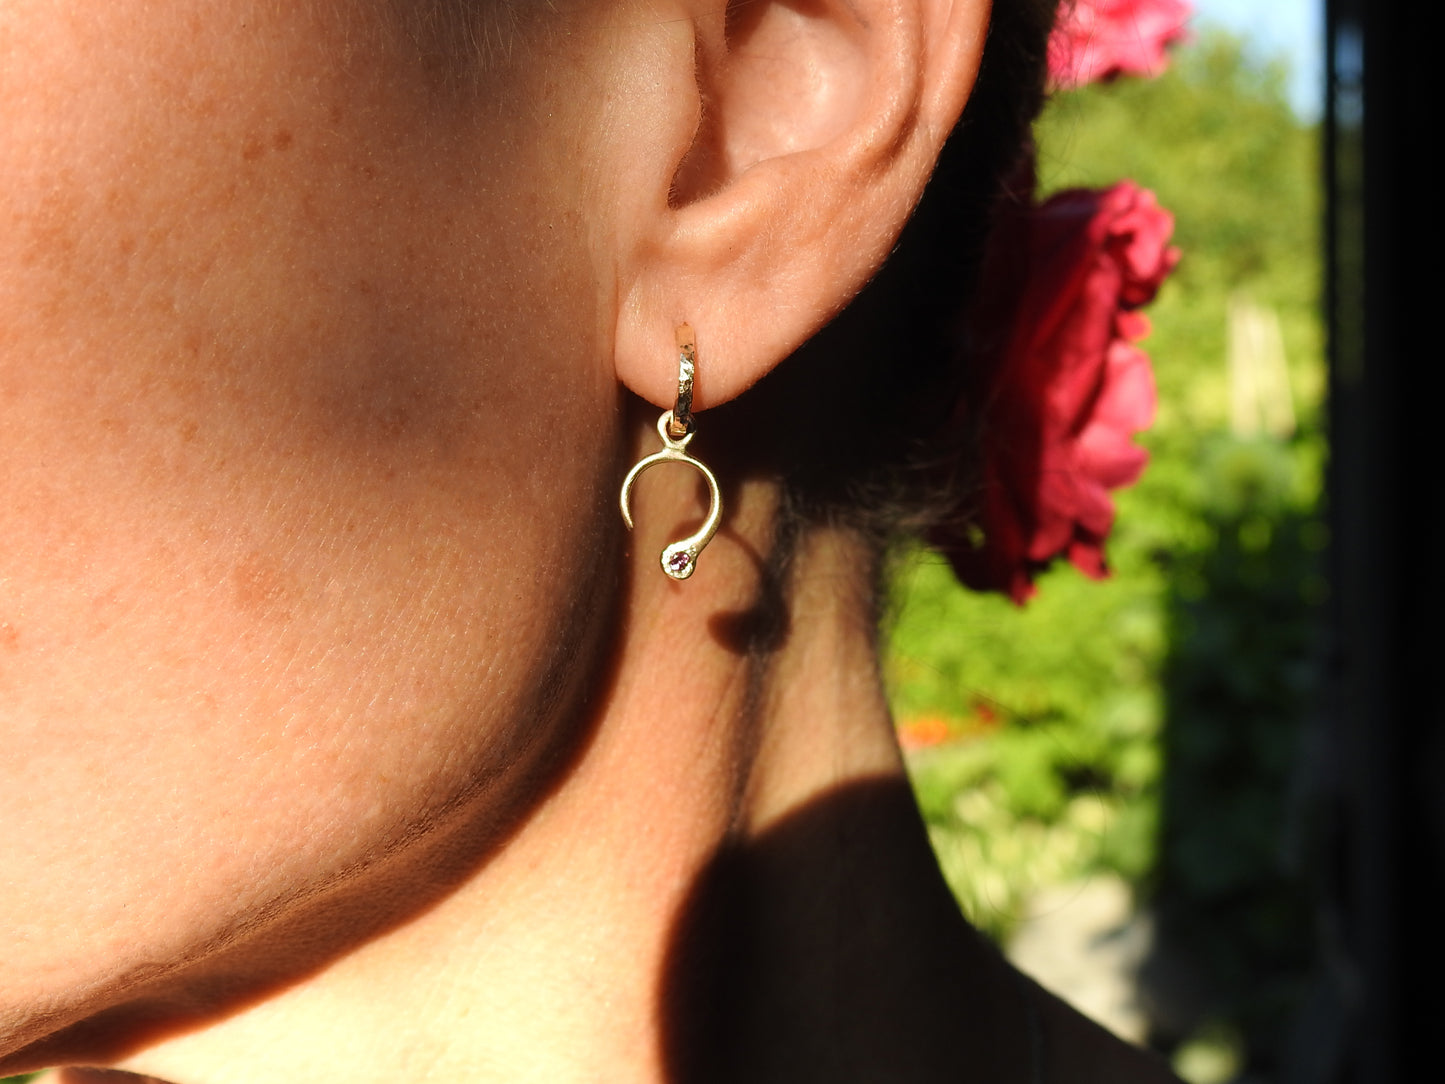 B E micro planish hoops in 14kt yellow gold, by ZEALmetal, Nicole Horlor, in Kinston, ON, Canada